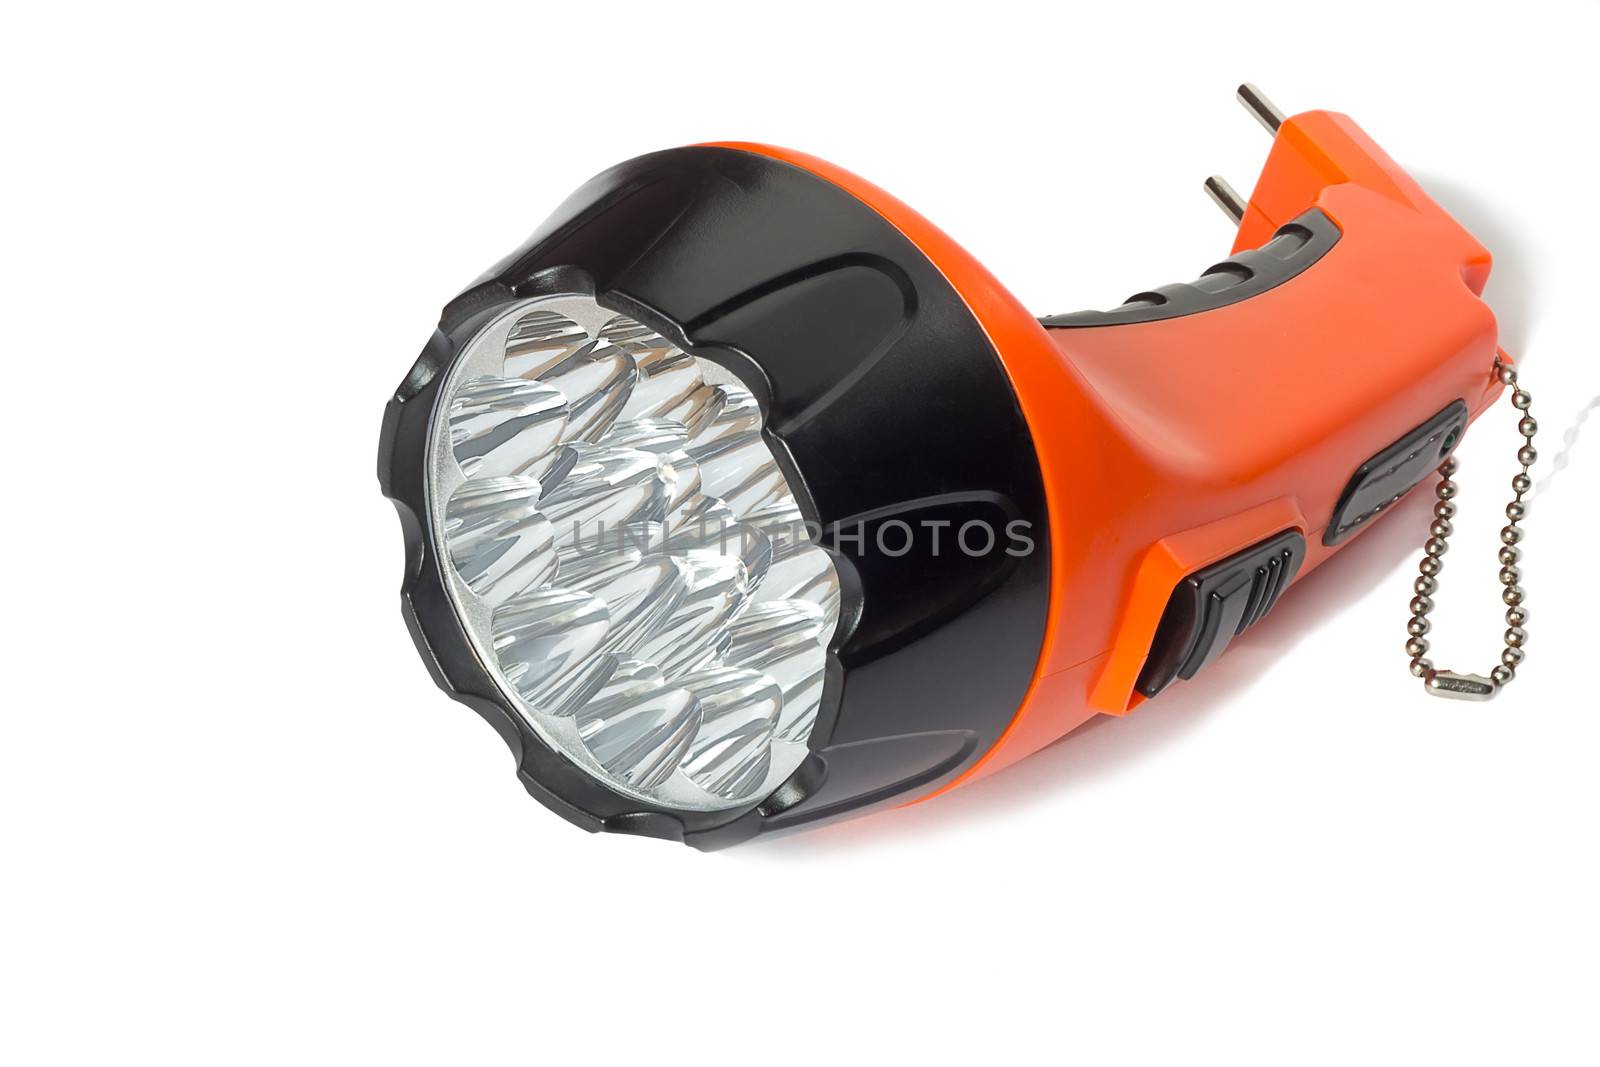 Comfortable small battery electric torch orange. Presented on a white background.